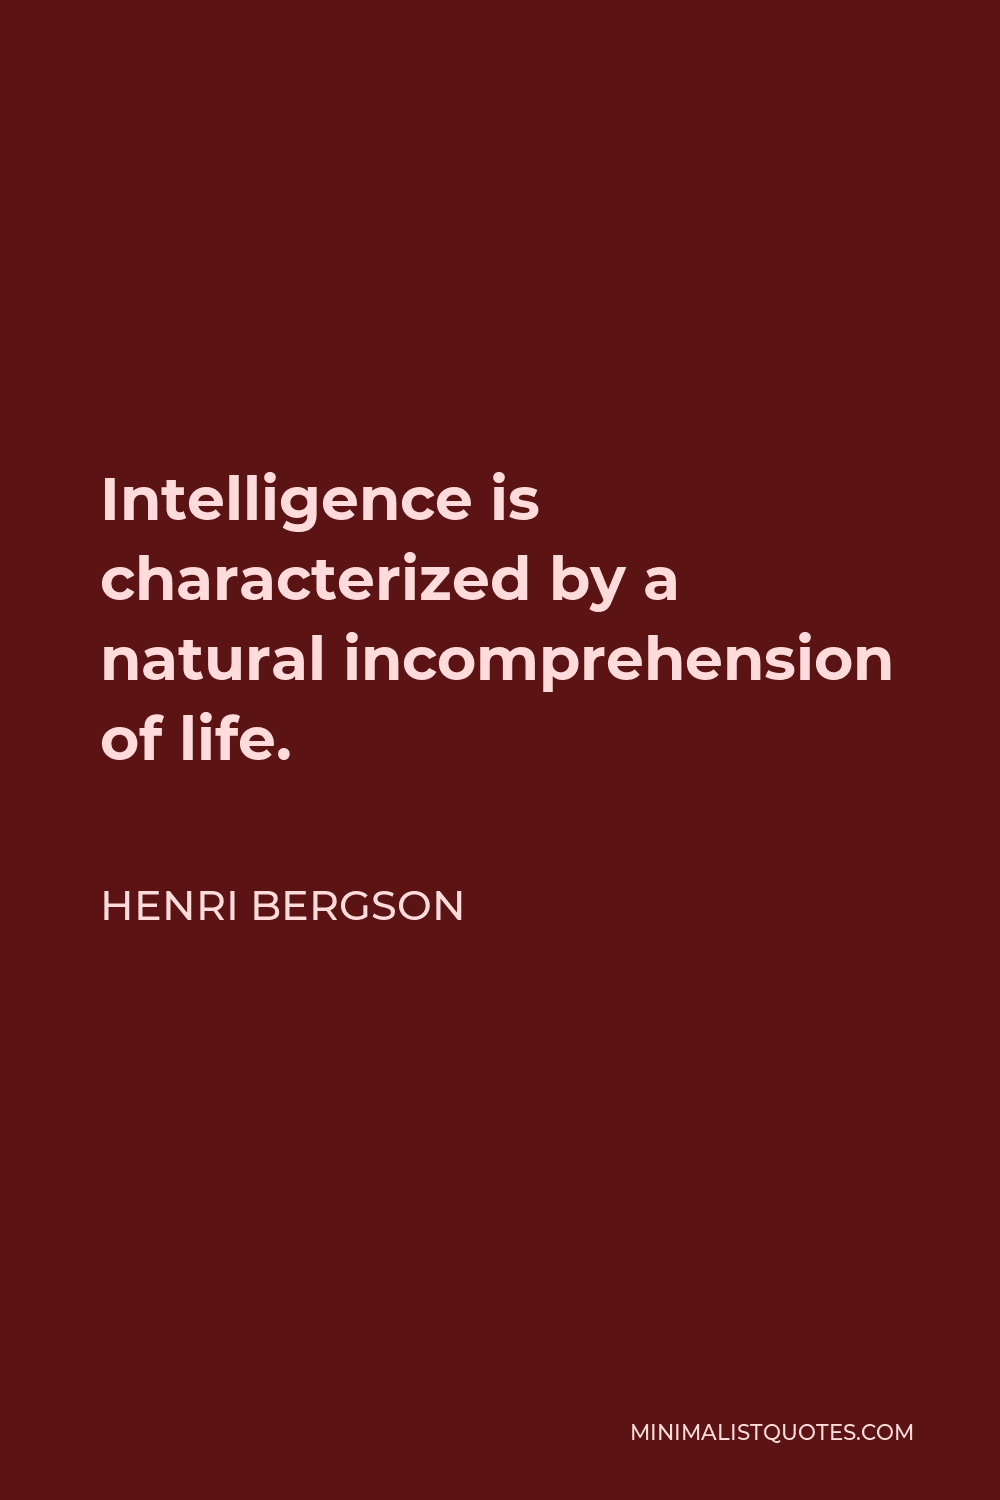 Henri Bergson Quote - Intelligence is characterized by a natural incomprehension of life.